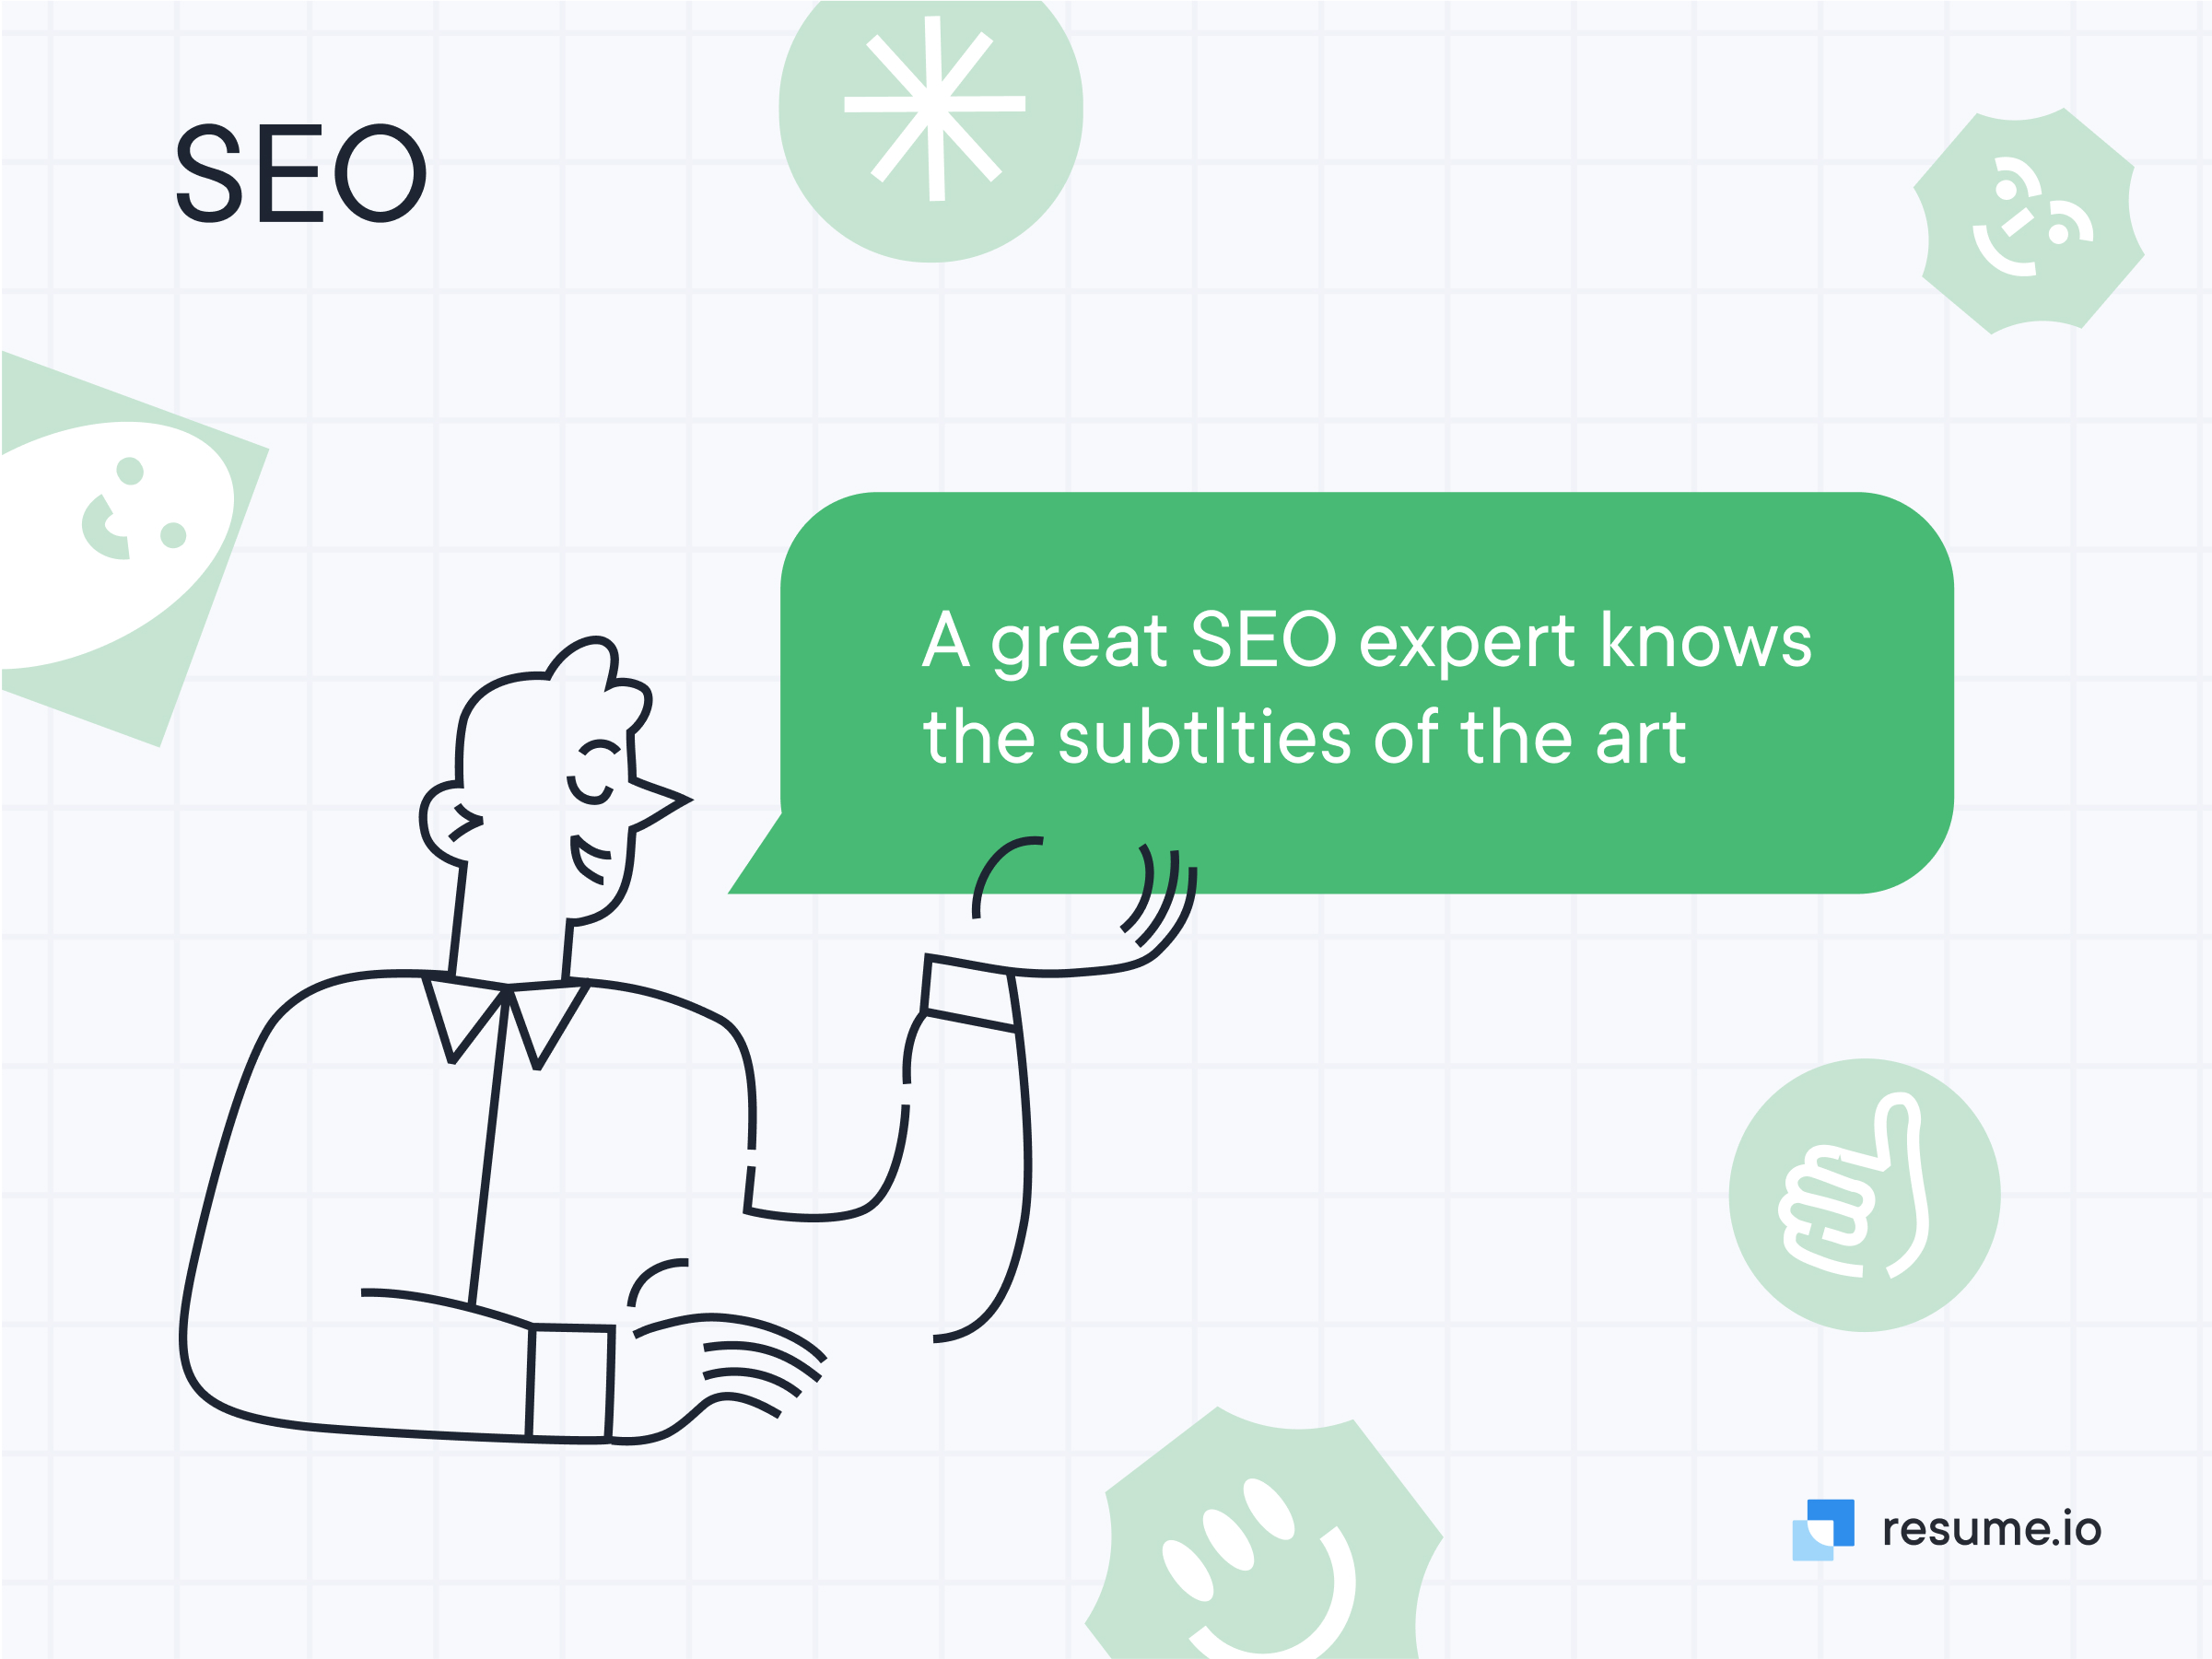 A great SEO expert knows the subtlties of the art